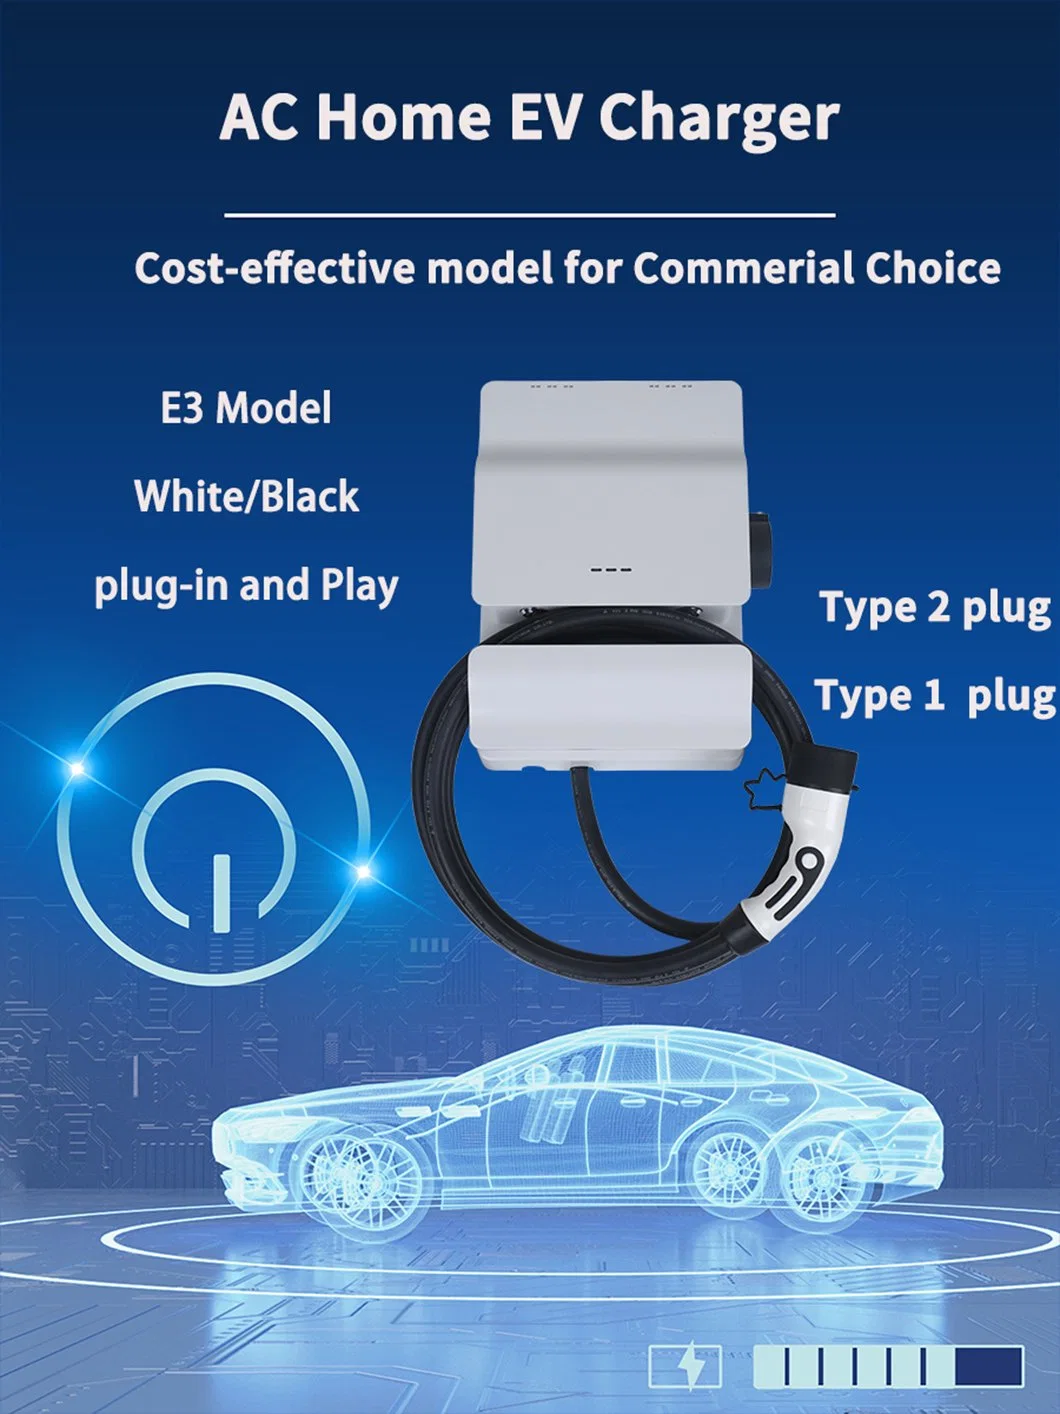 China Manufacturer 22kw 32A EV Wall Charger AC Charge Type 2 Mode 3 Level 2 Wall-Mounted EV Car Charging Wallbox with CE Approval